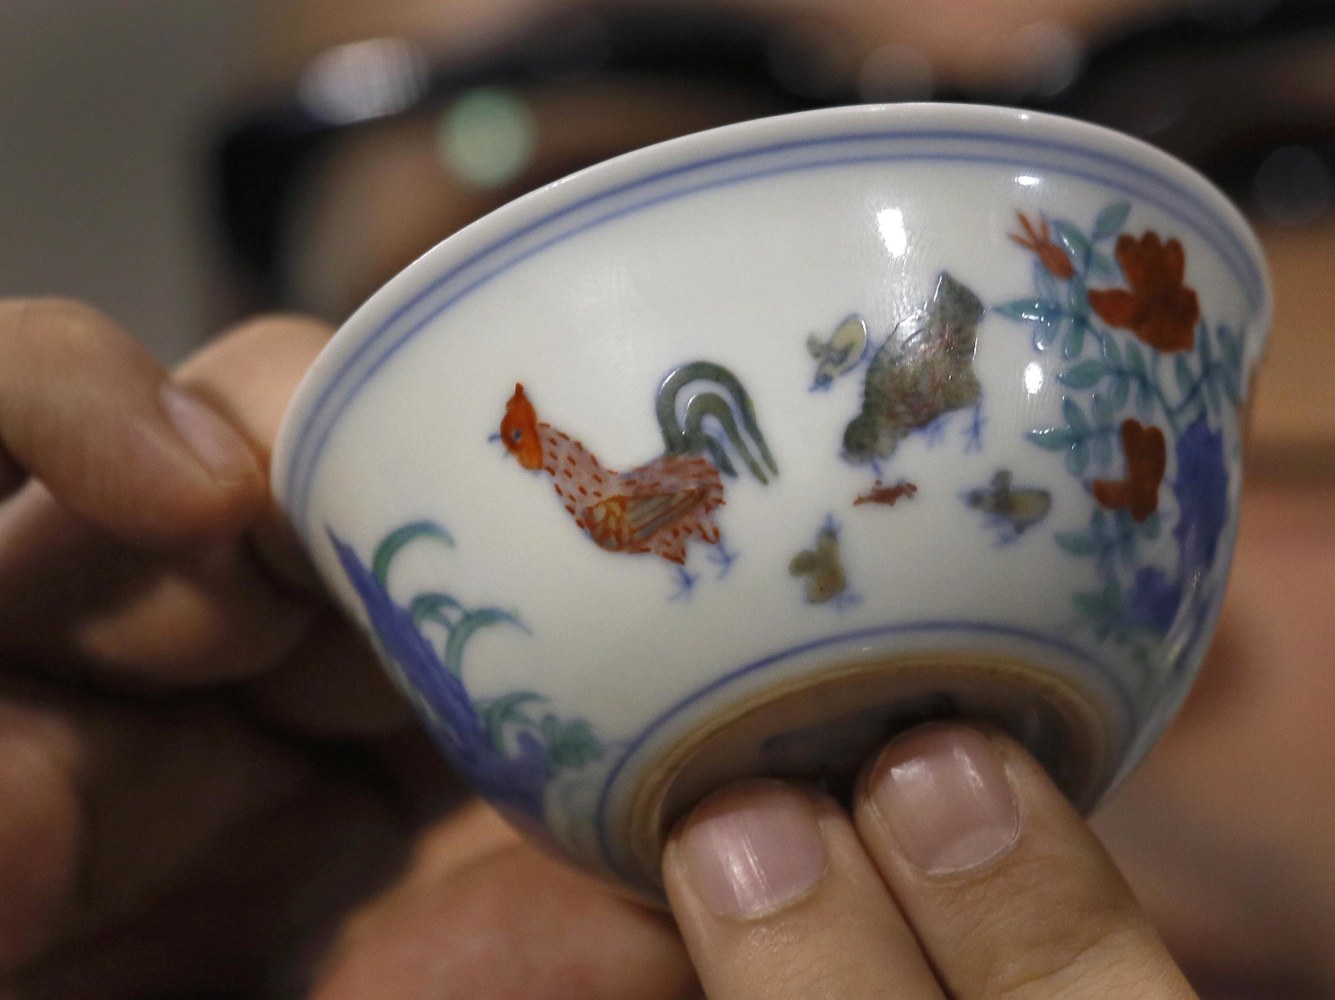 Ming Bling: $36M for "Chicken" Cup in Record for China Porcelain - NBC News